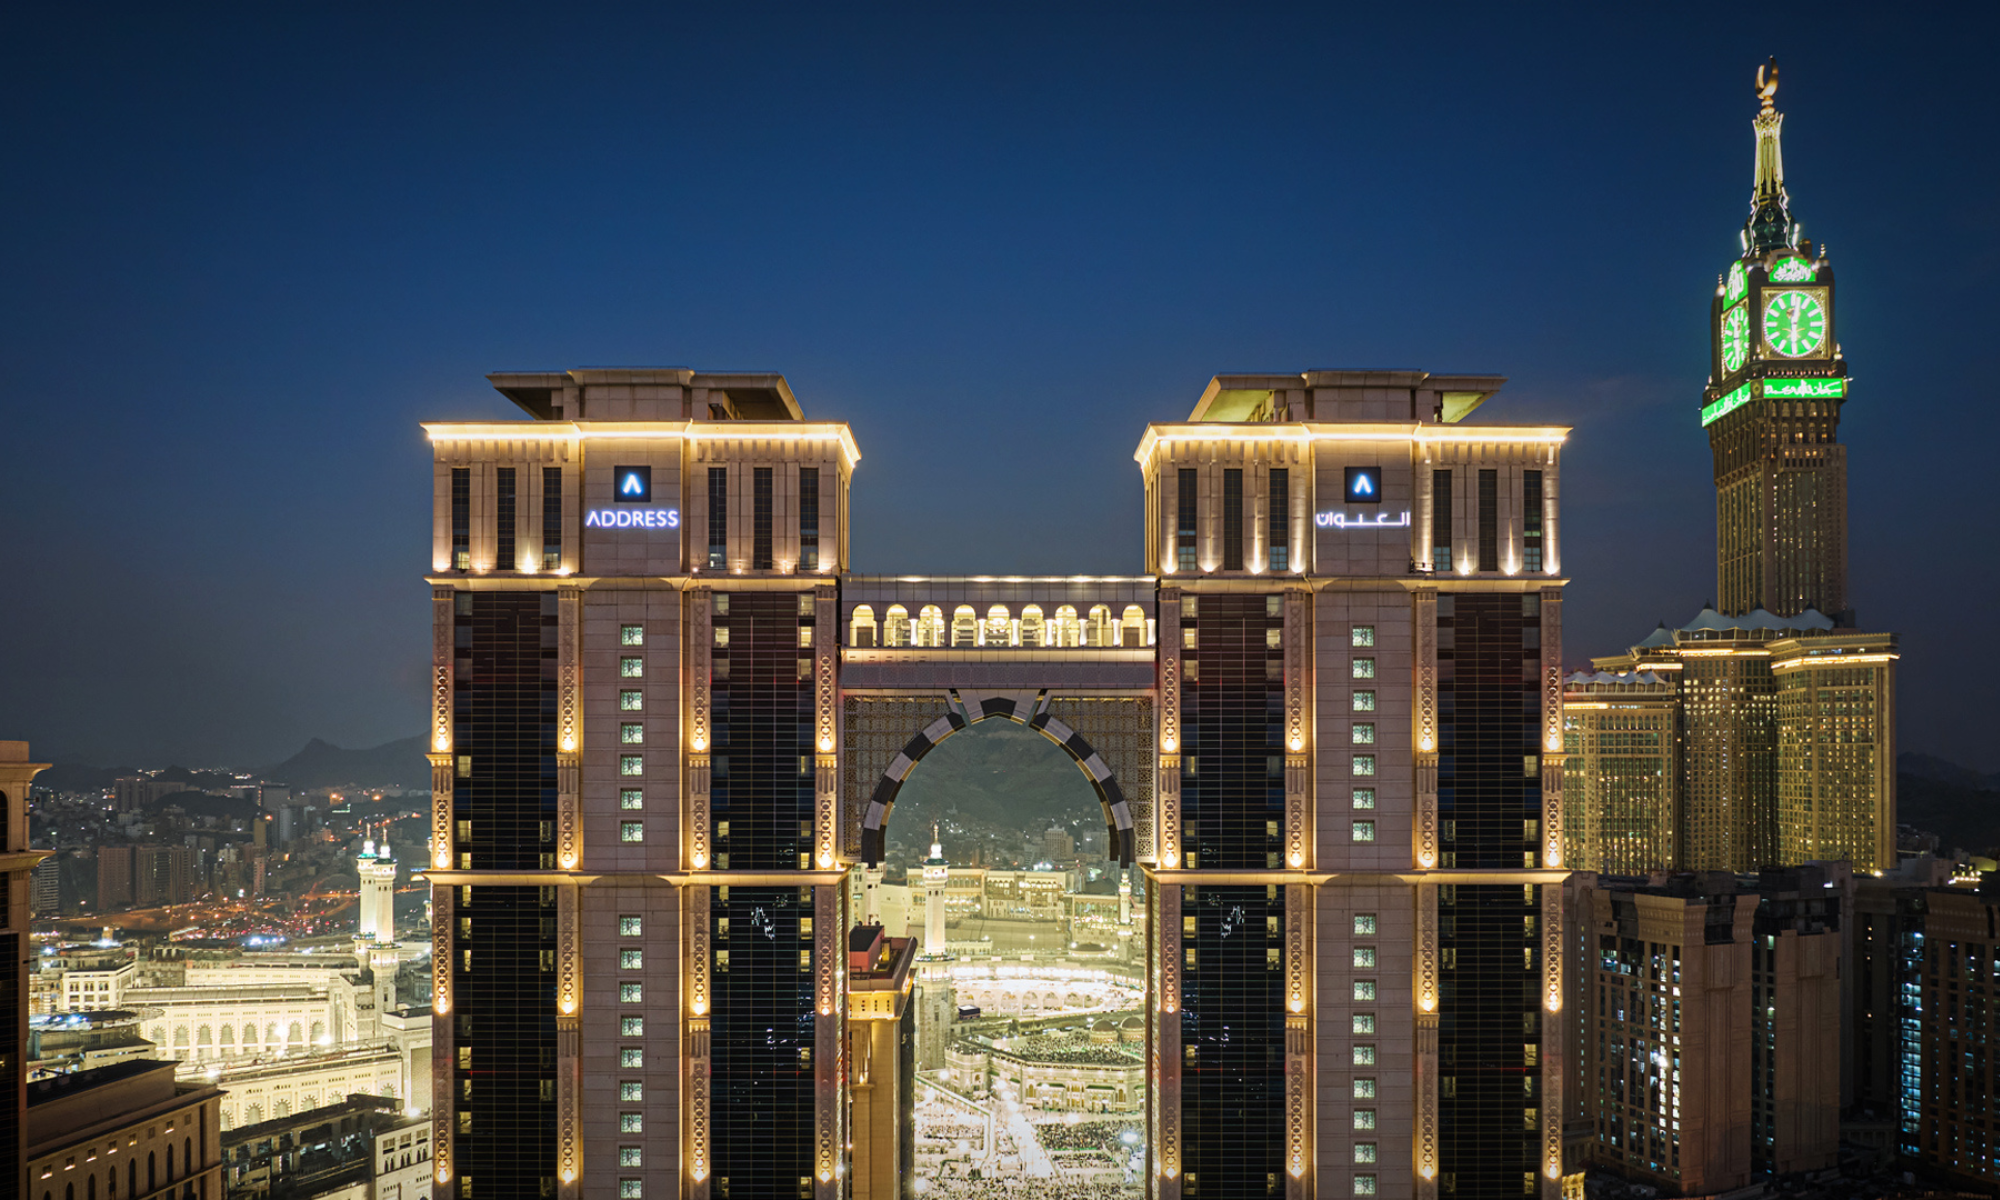 Exclusive Launch Offer: Earn 3X Upoints at Address Jabal Omar Makkah Hotel